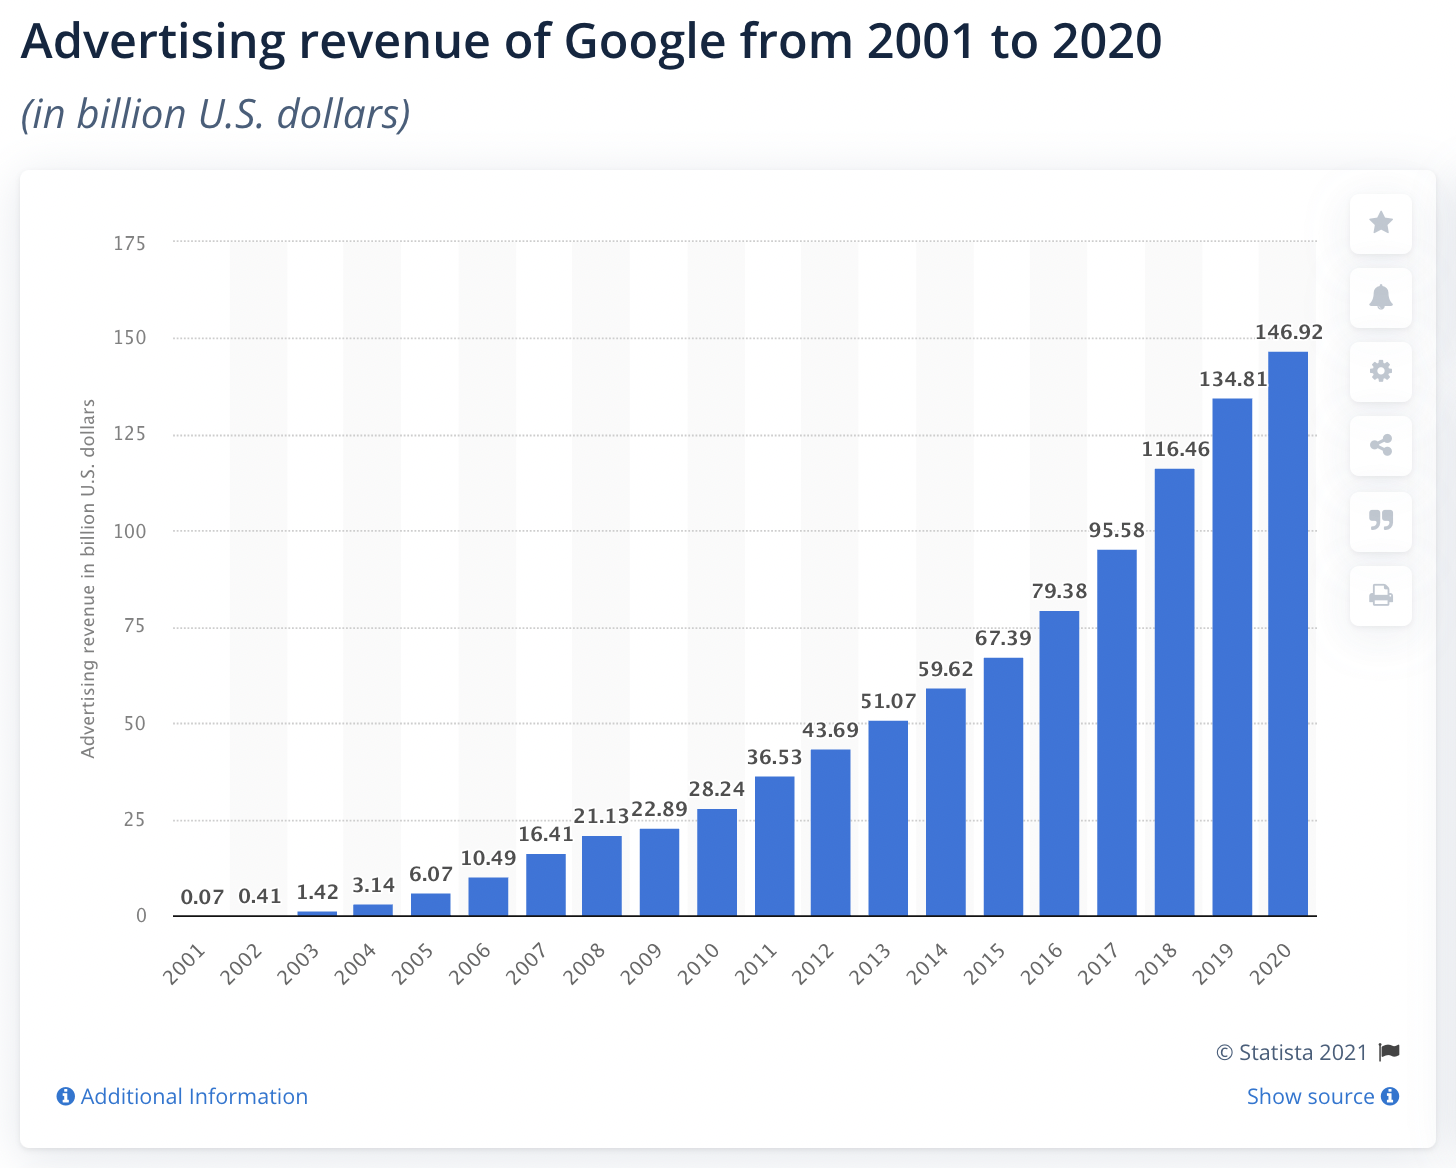 Advertising revenue of Google from 2001 to 2020